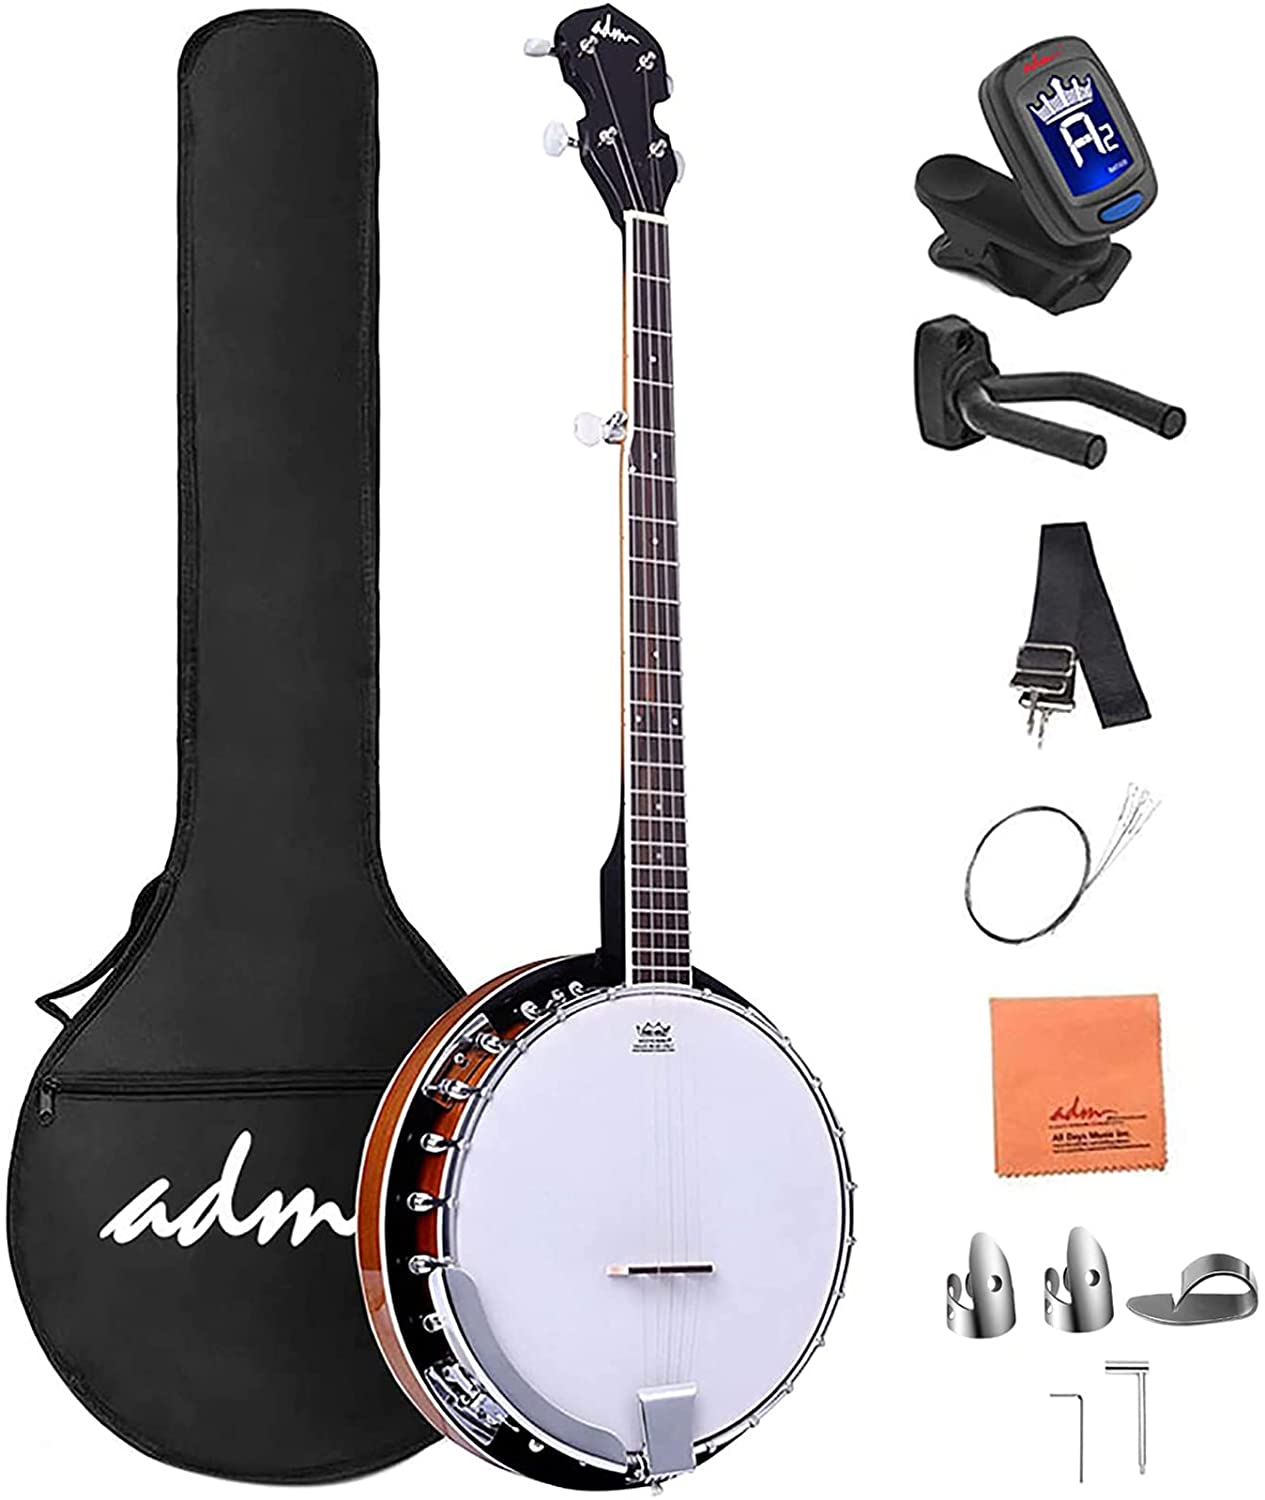 ADM 5 String Banjo Large 24 Bracket with Closed Solid Wood Back What Is the Best Banjo for a Beginner? - Common Questions About the Banjo